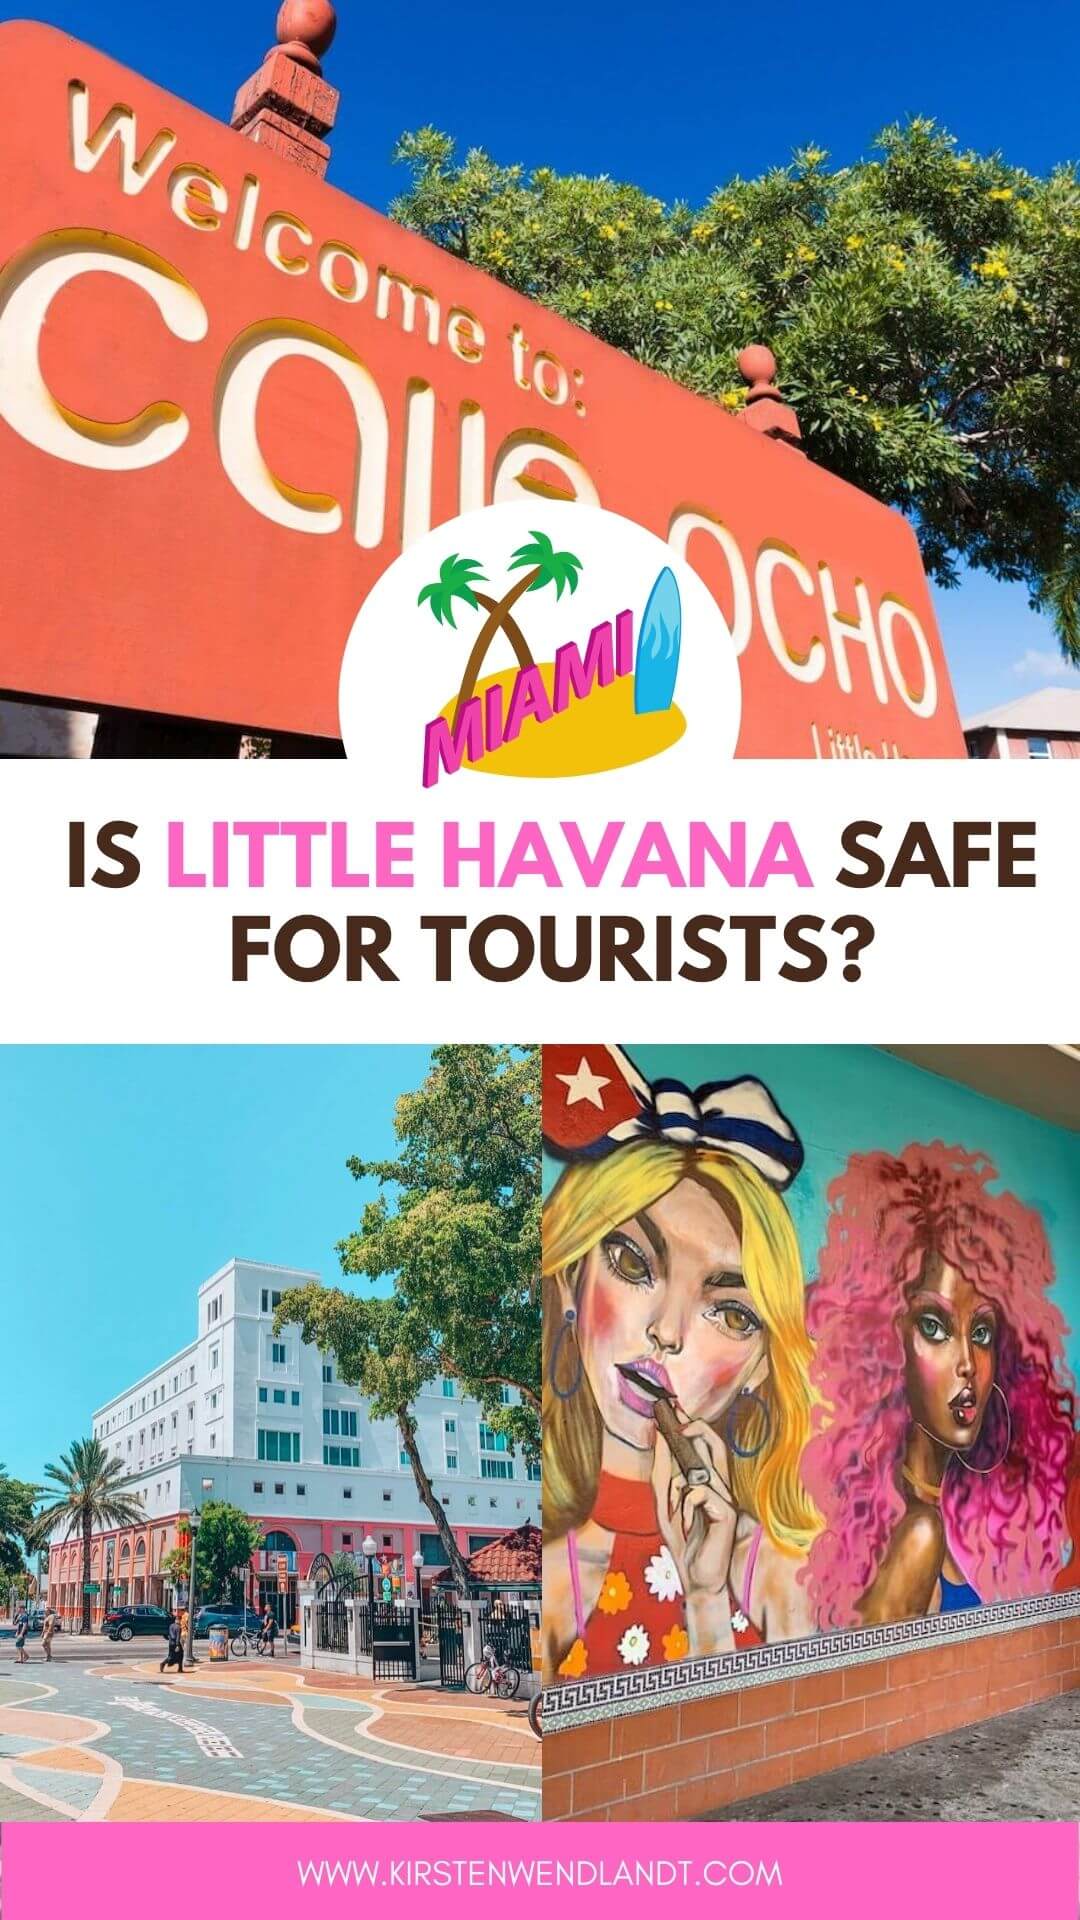 Is Little Havana safe? One of the most asked questions about Little Havana, and even Miami in general is whether it's safe for visitors and tourists. As a female traveler who has visited Little Havana myself, I am here to answer all your questions regarding the safety of Little Havana. I hope this post eases your fears and encourages you to visit this the vibrant neighborhood of Little Havana in Miami!